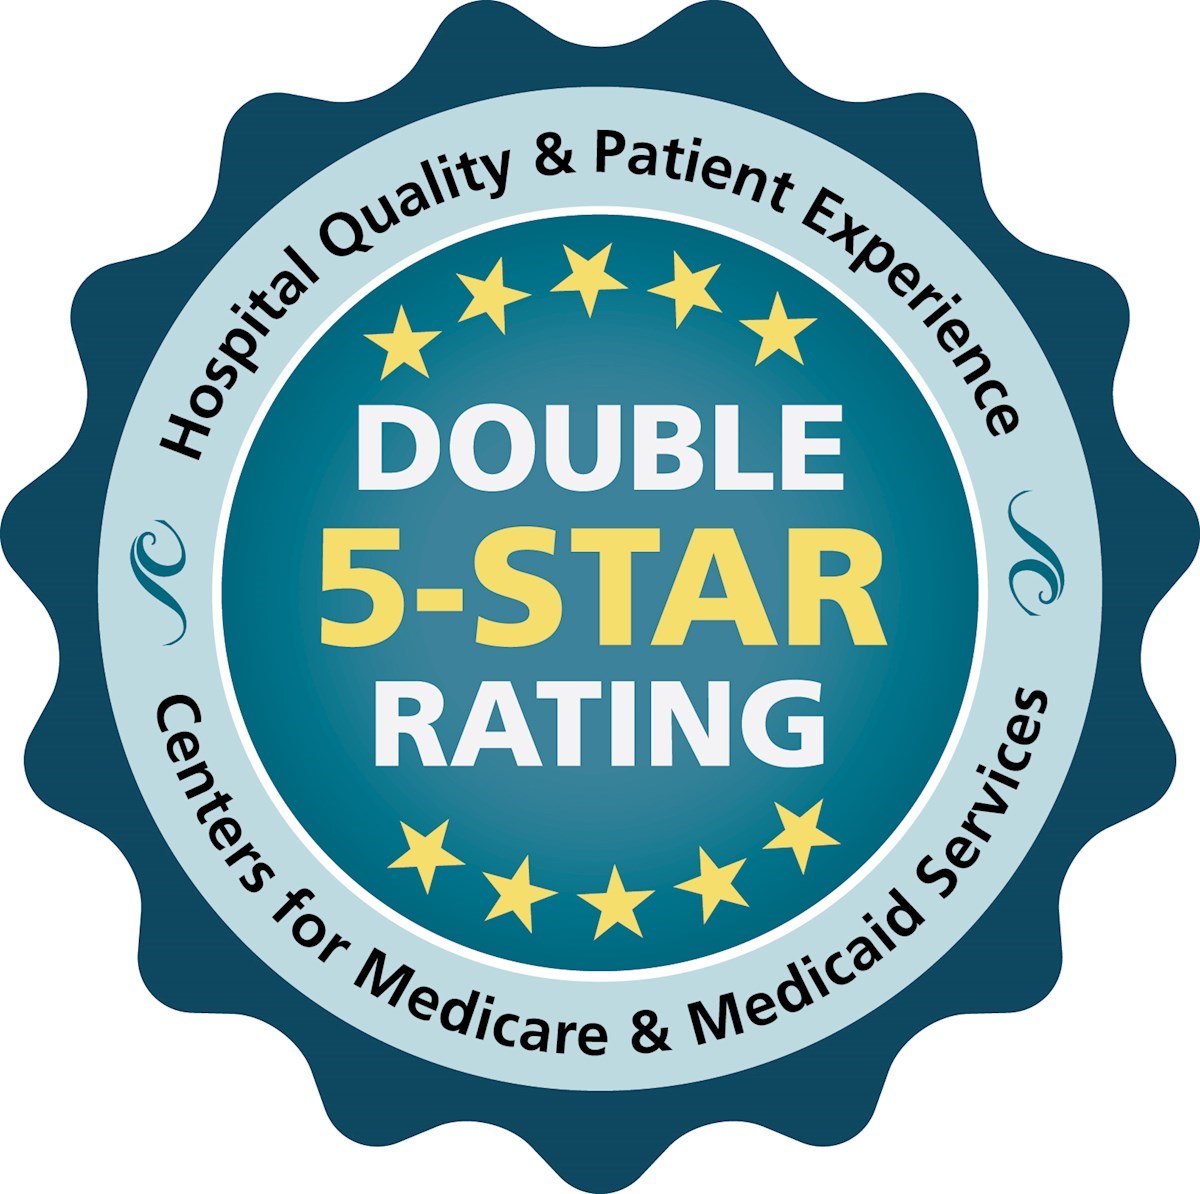 Hospital ranked among best for Quality and Patient Experience